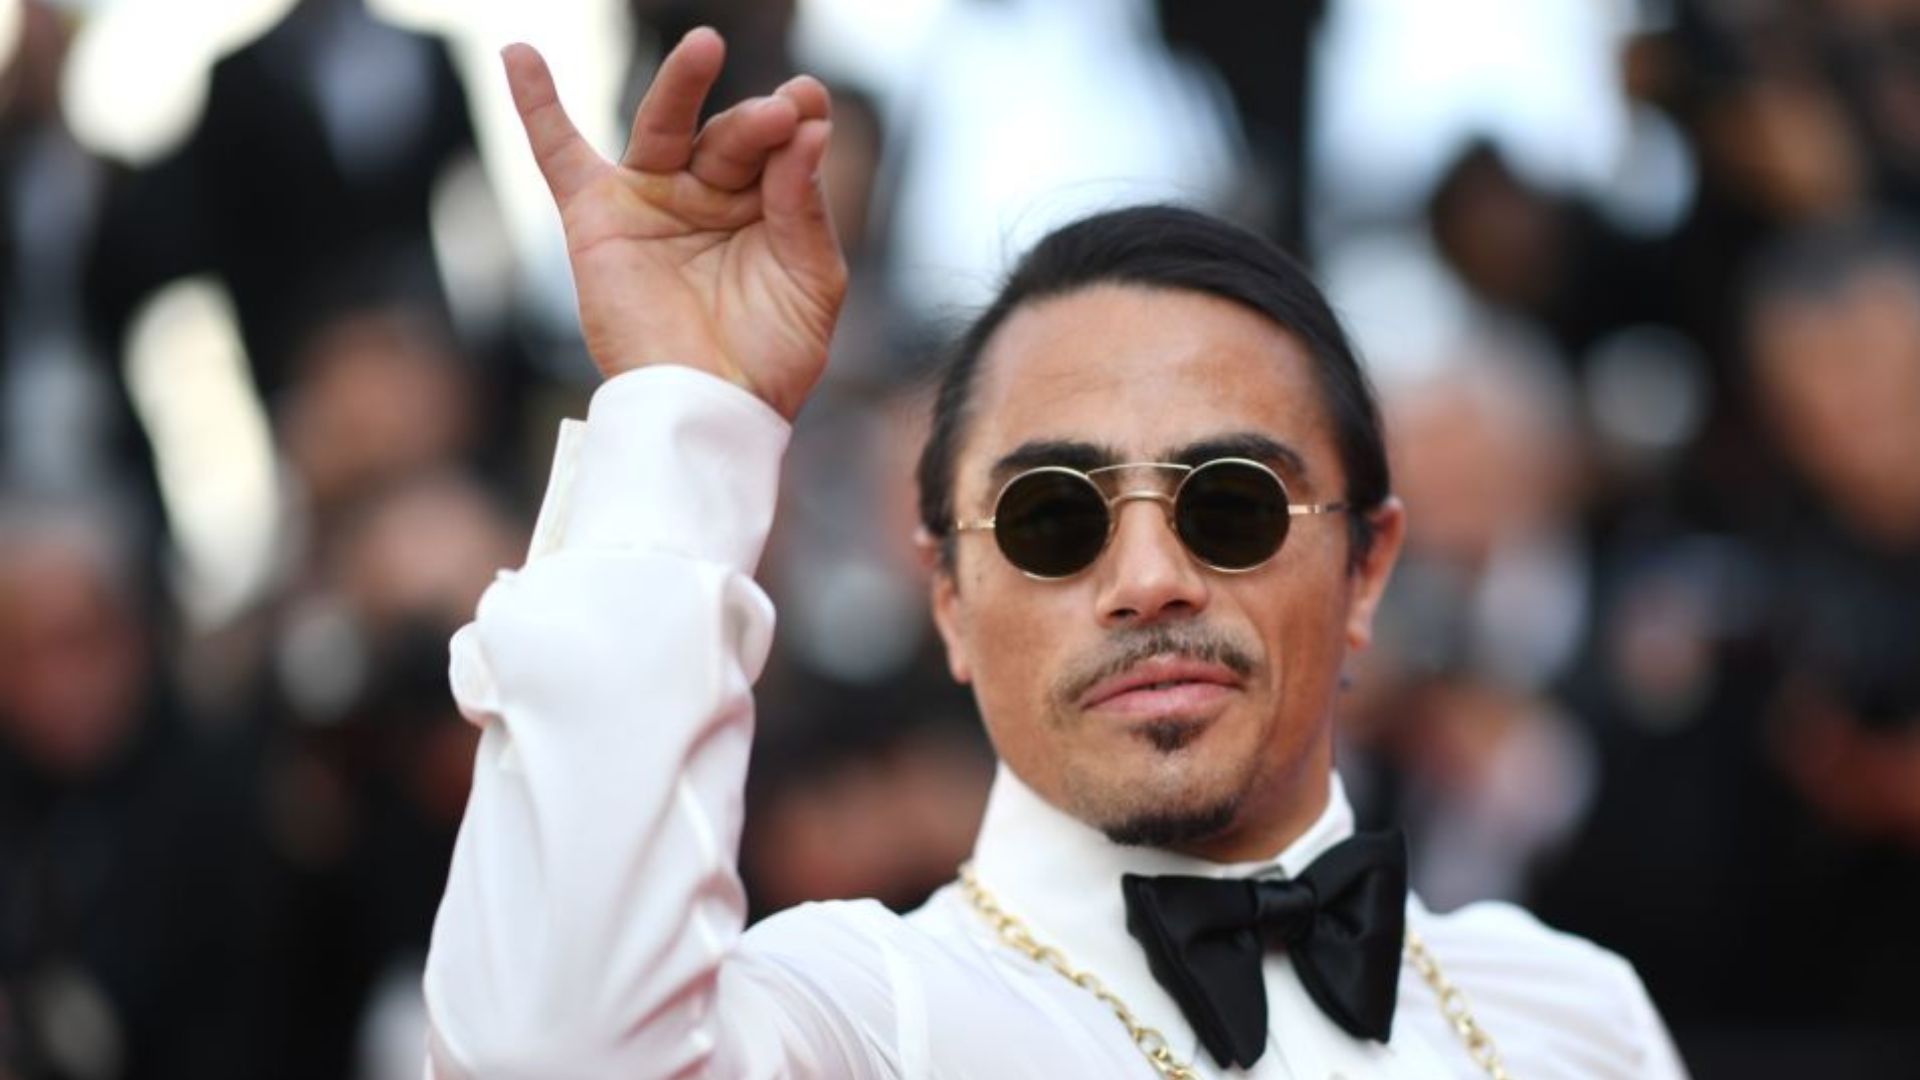 Salt Bae’s Jaw-Dropping $108K Bill Triggers Outrage on Social Media